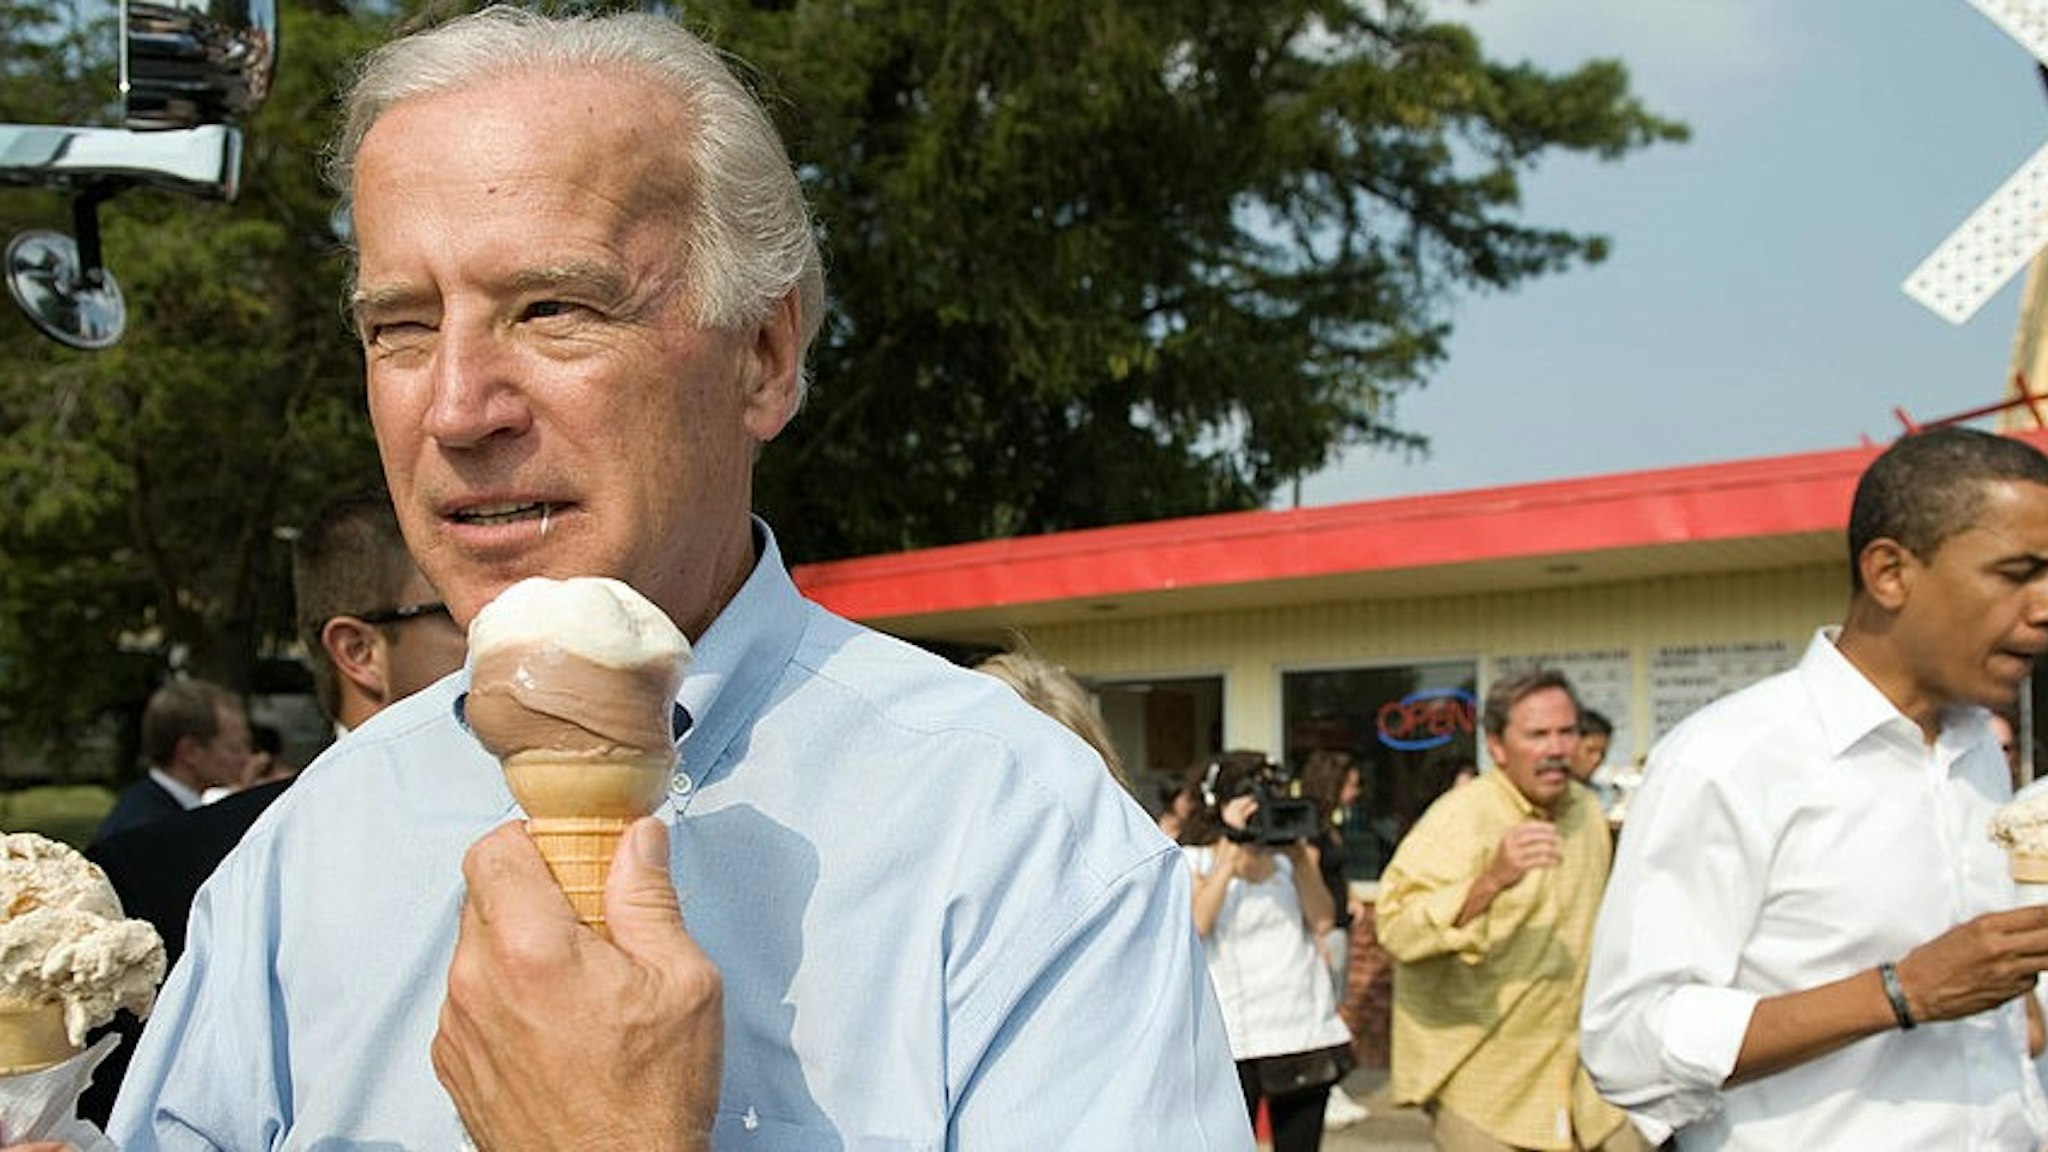 US vice presidential nominee Senator Joe Biden (L) and Democratic presidential nominee Senator Barack Obama (R) enjoy ice cream cones as they speak with local residents at the Windmill Ice Cream Shop in Aliquippa, Pennsylvania, August 29, 2008. AFP PHOTO / SAUL LOEB (Photo credit should read